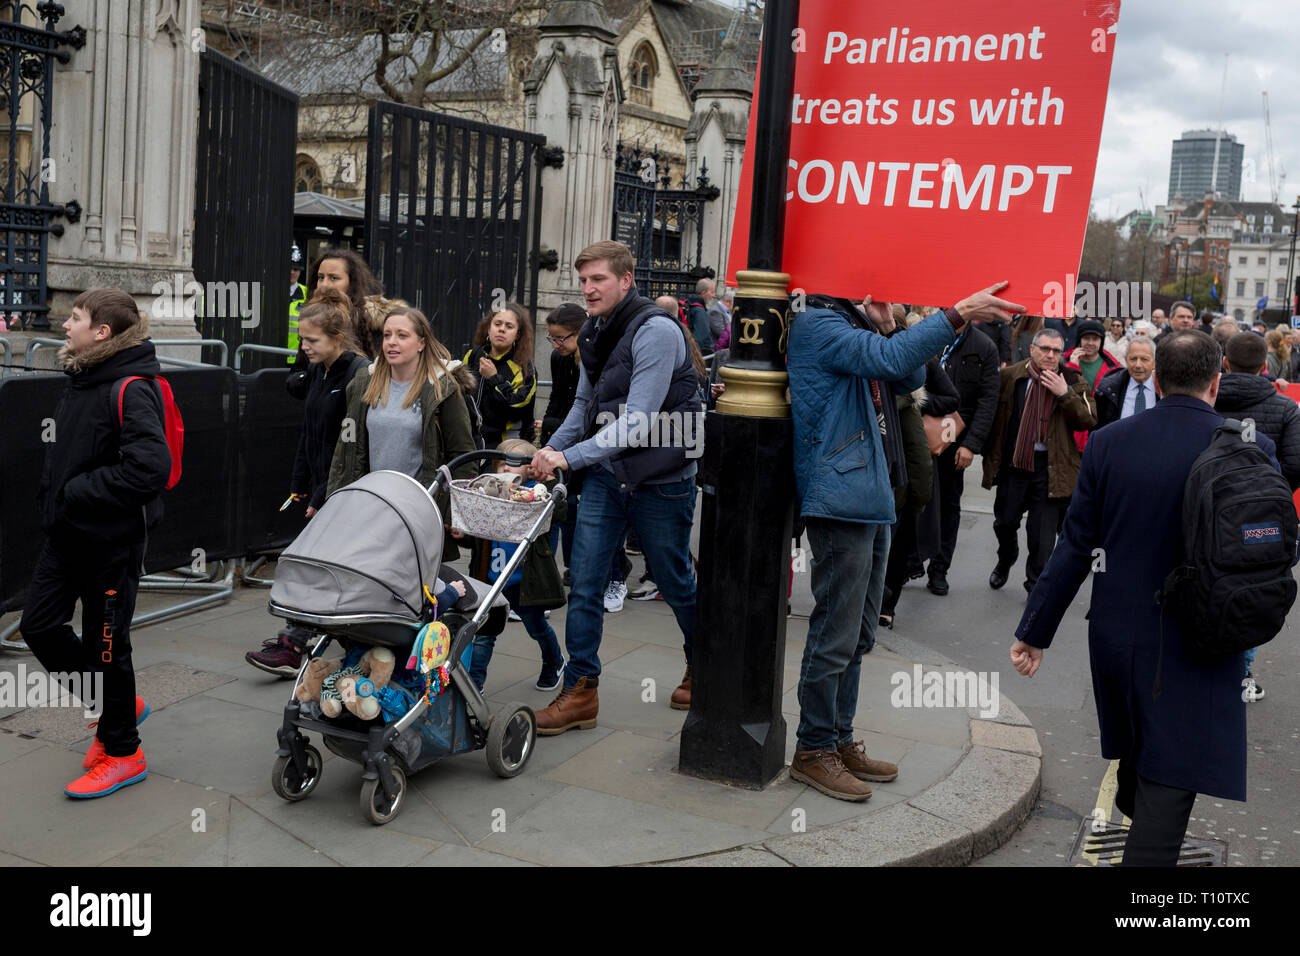 A day after Commons Speaker John Bercow announced his refusal to accept Prime Minster Theresa May's third Brexit Meaningful Vote, a Brexiteer holds a sign about parliament's contemptuous treatment of its people, on 19th March 2019, in London, England. Stock Photo